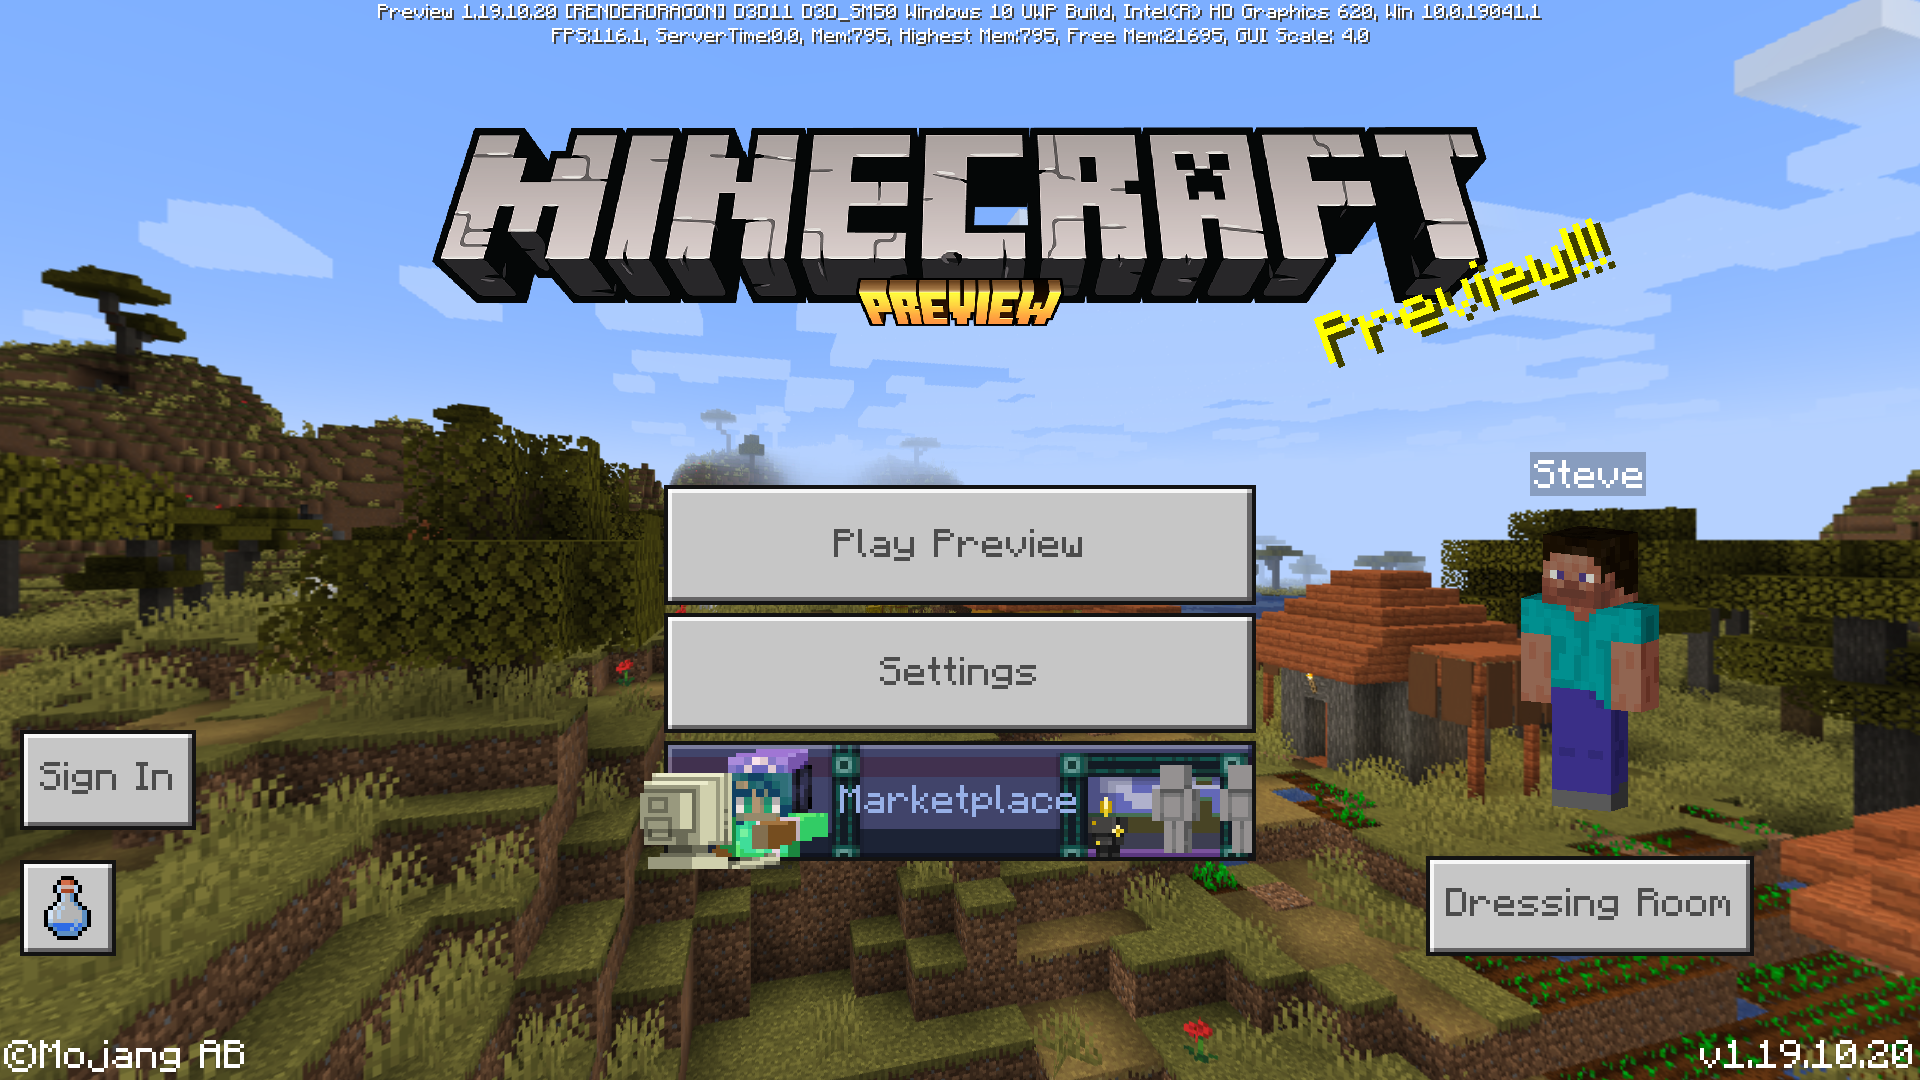 Minecraft 1.19.10 update Bedrock edition: What's new and how to download it